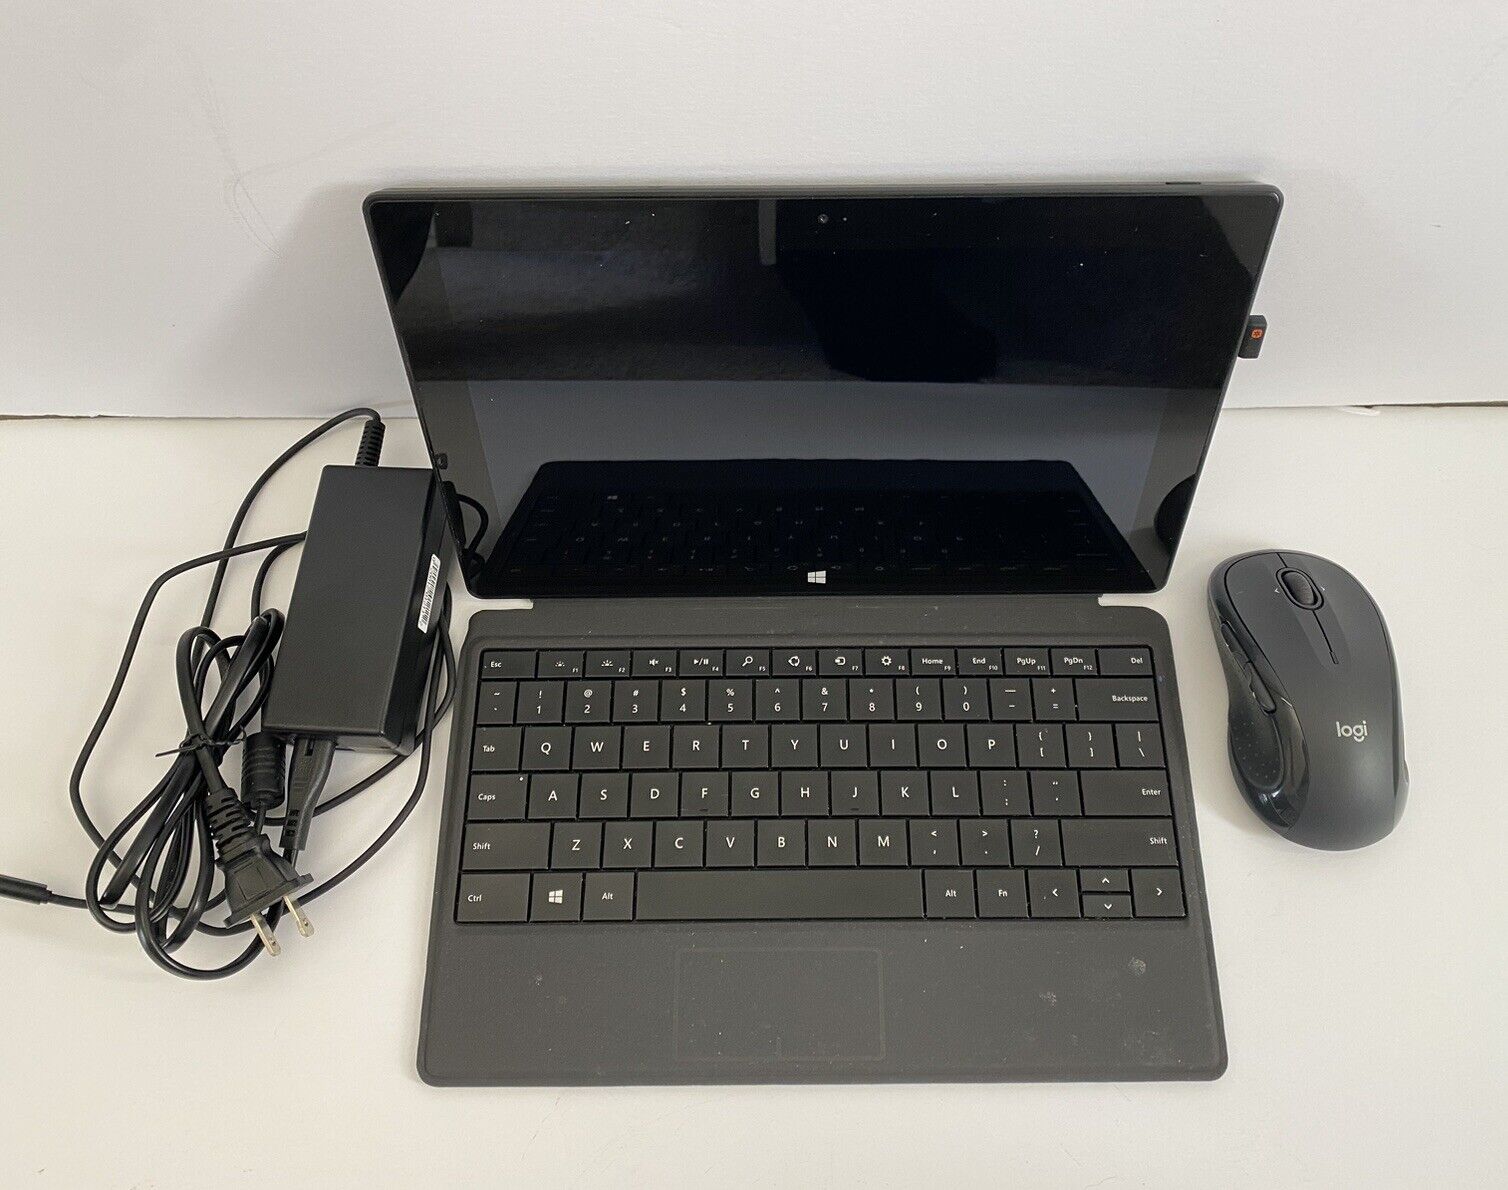 Microsoft Surface RT 64GB 1516 with Keyboard, Bluetooth Mouse, AC Adapter Bundle